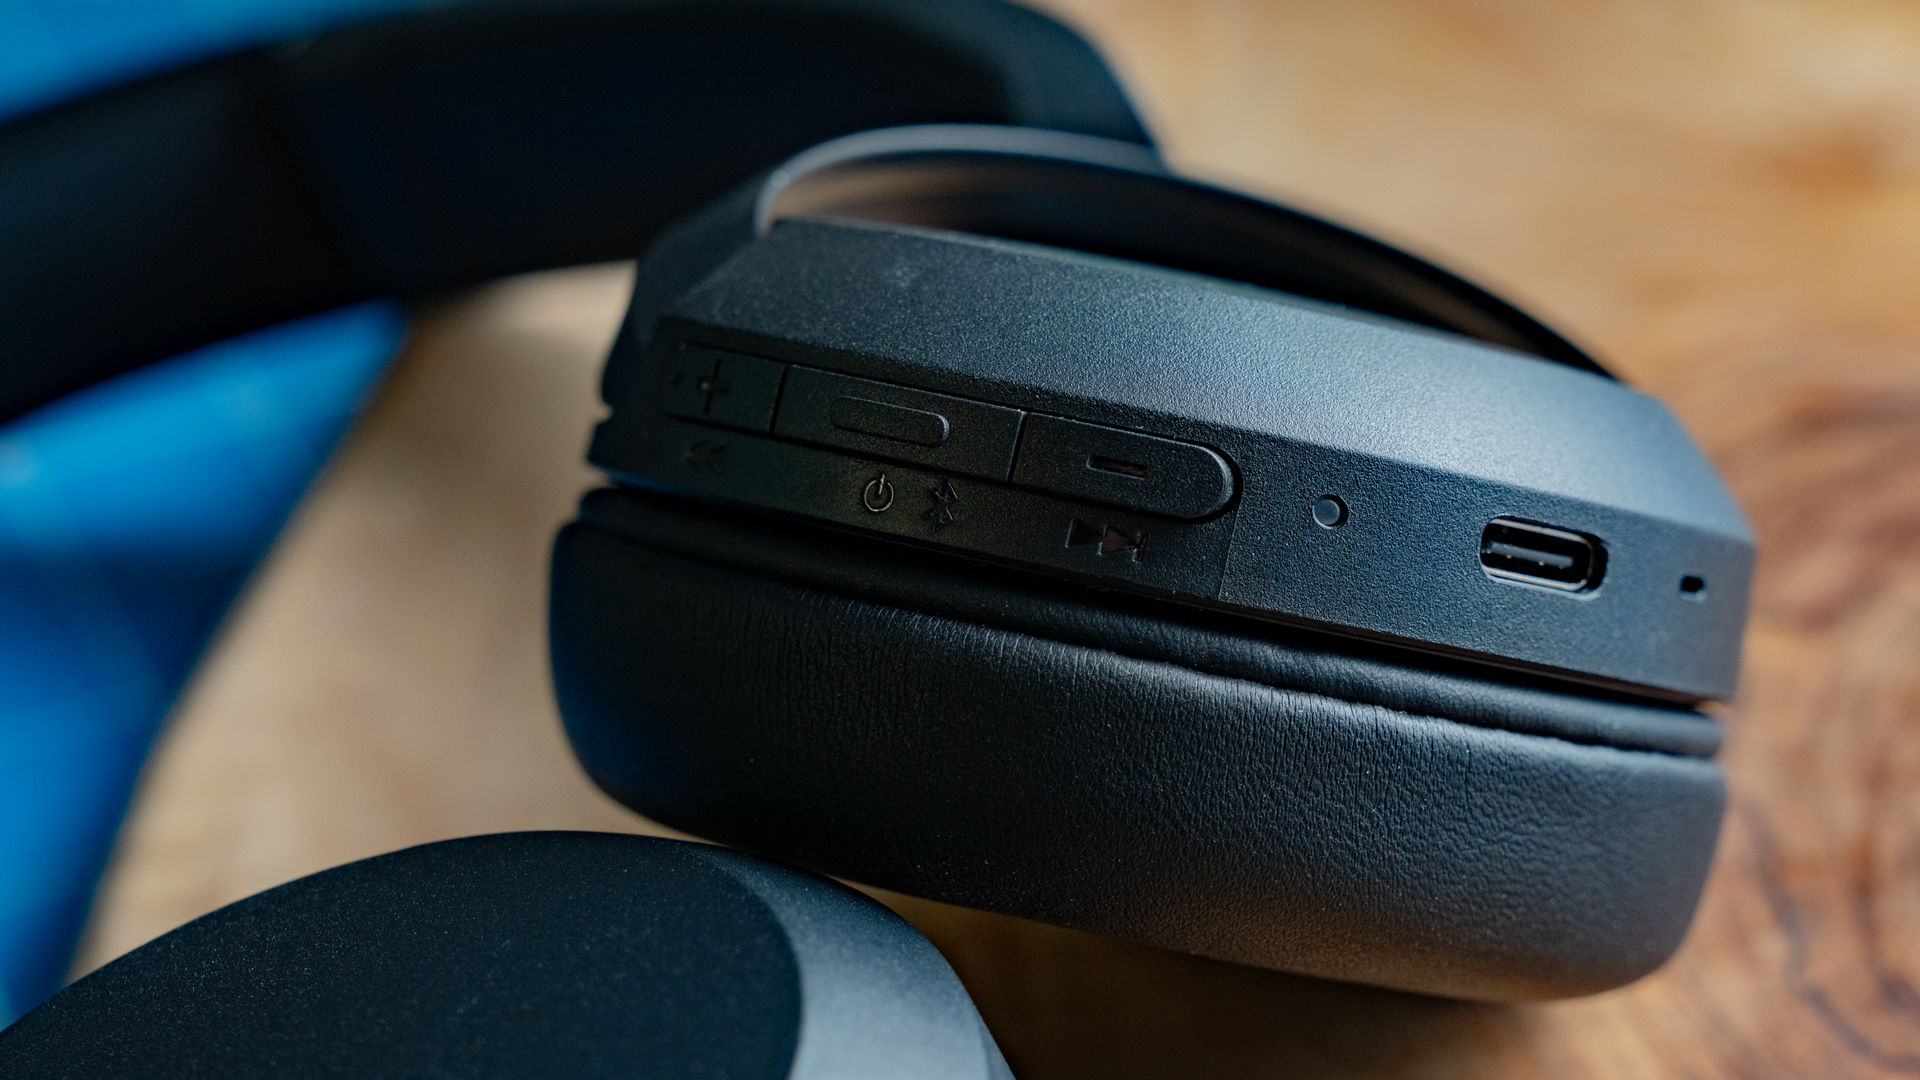 Super Affordable': $100 Sony WH-CH520 Wireless Headphones are More